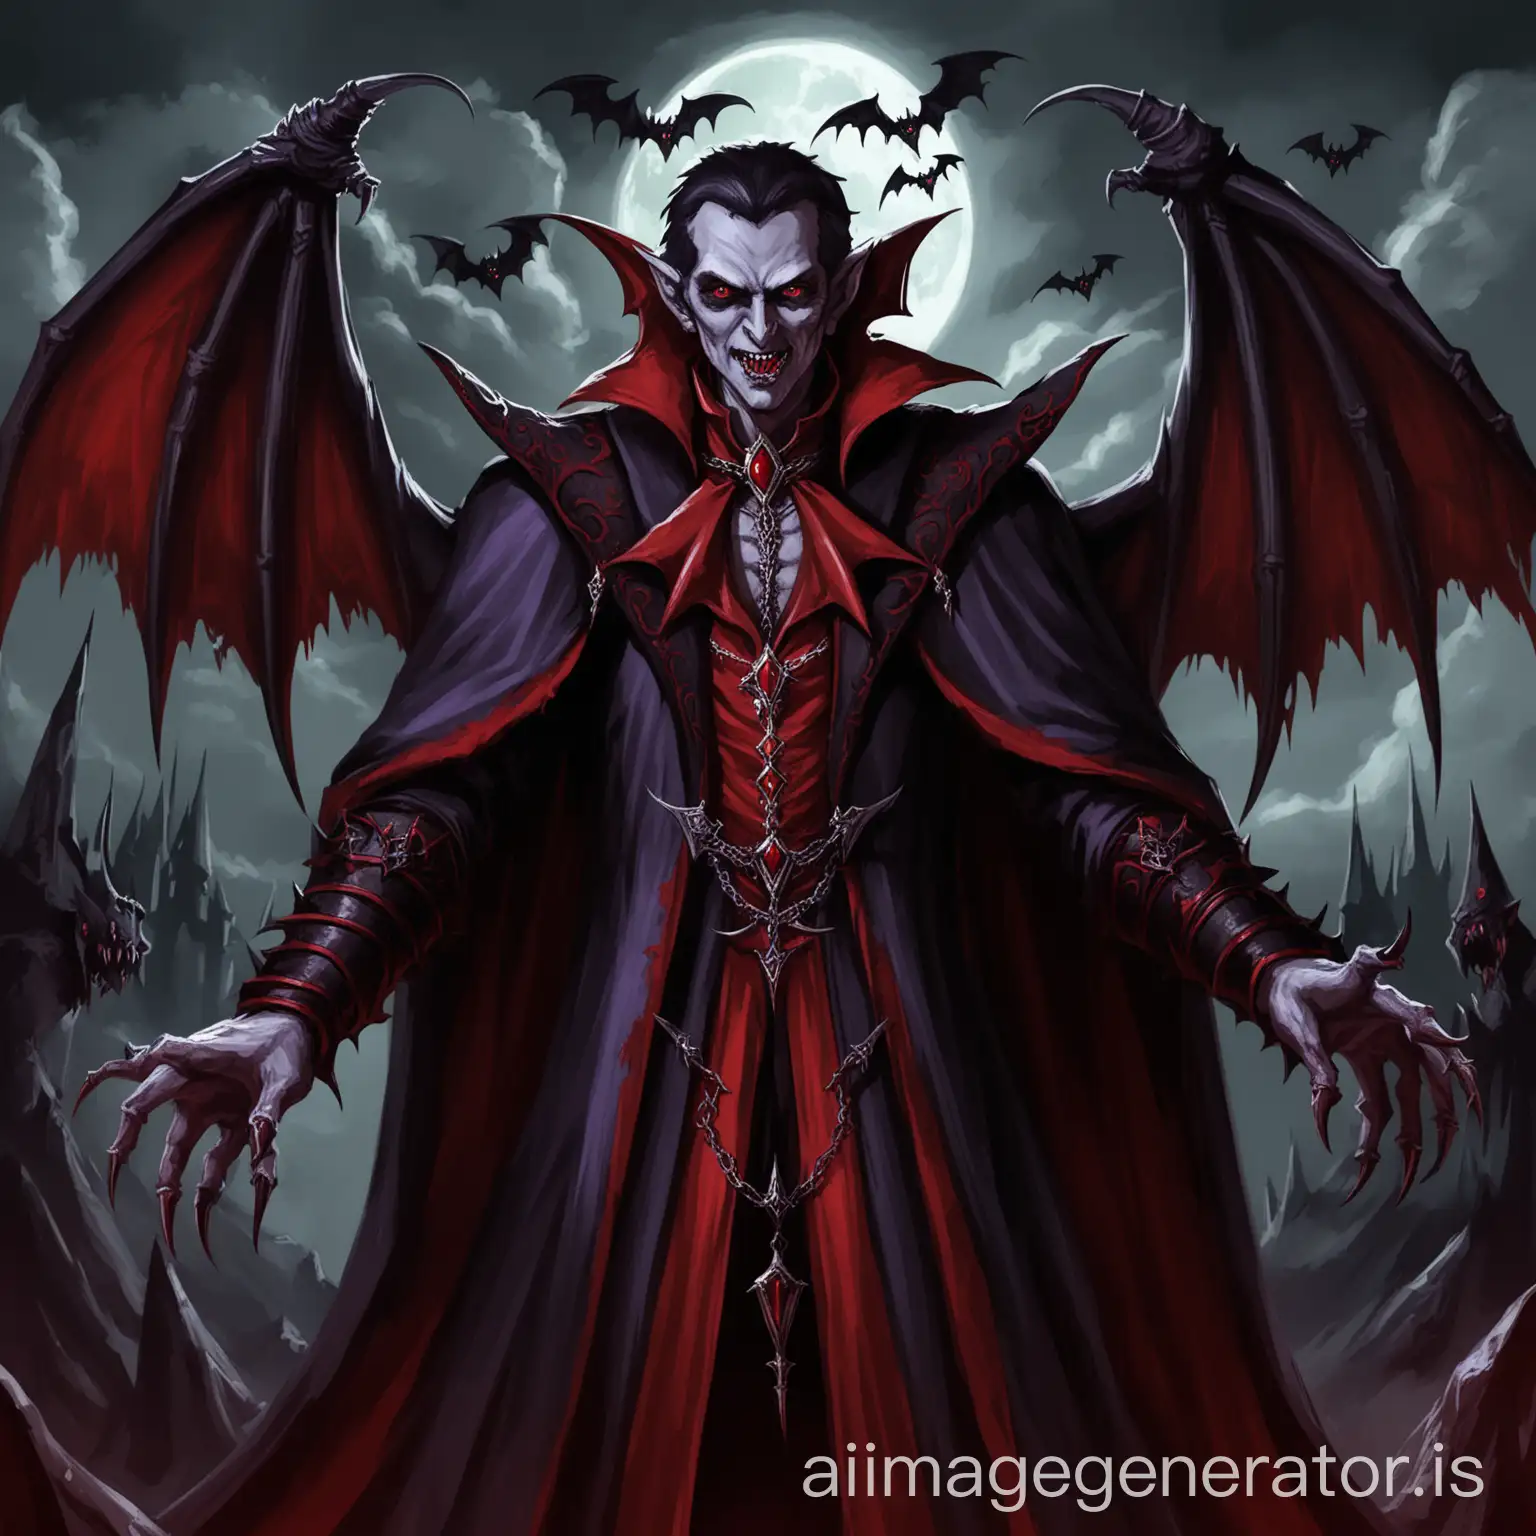 Drakul - The ancient vampire lord who seeks to dominate the human world.